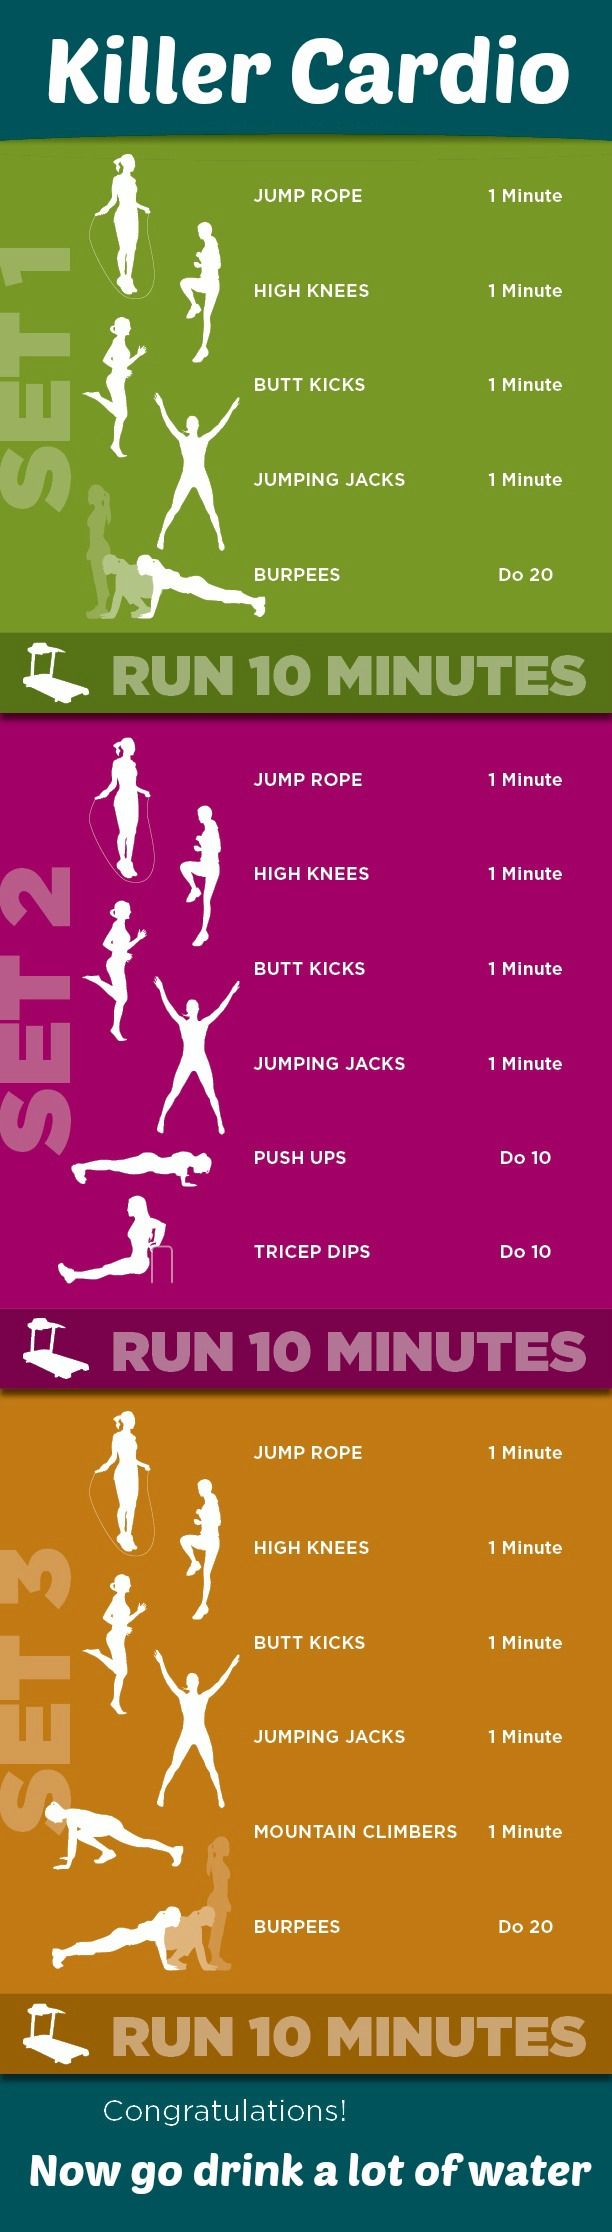 Cardio workout plan without equipment, material aerobic fitness workouts